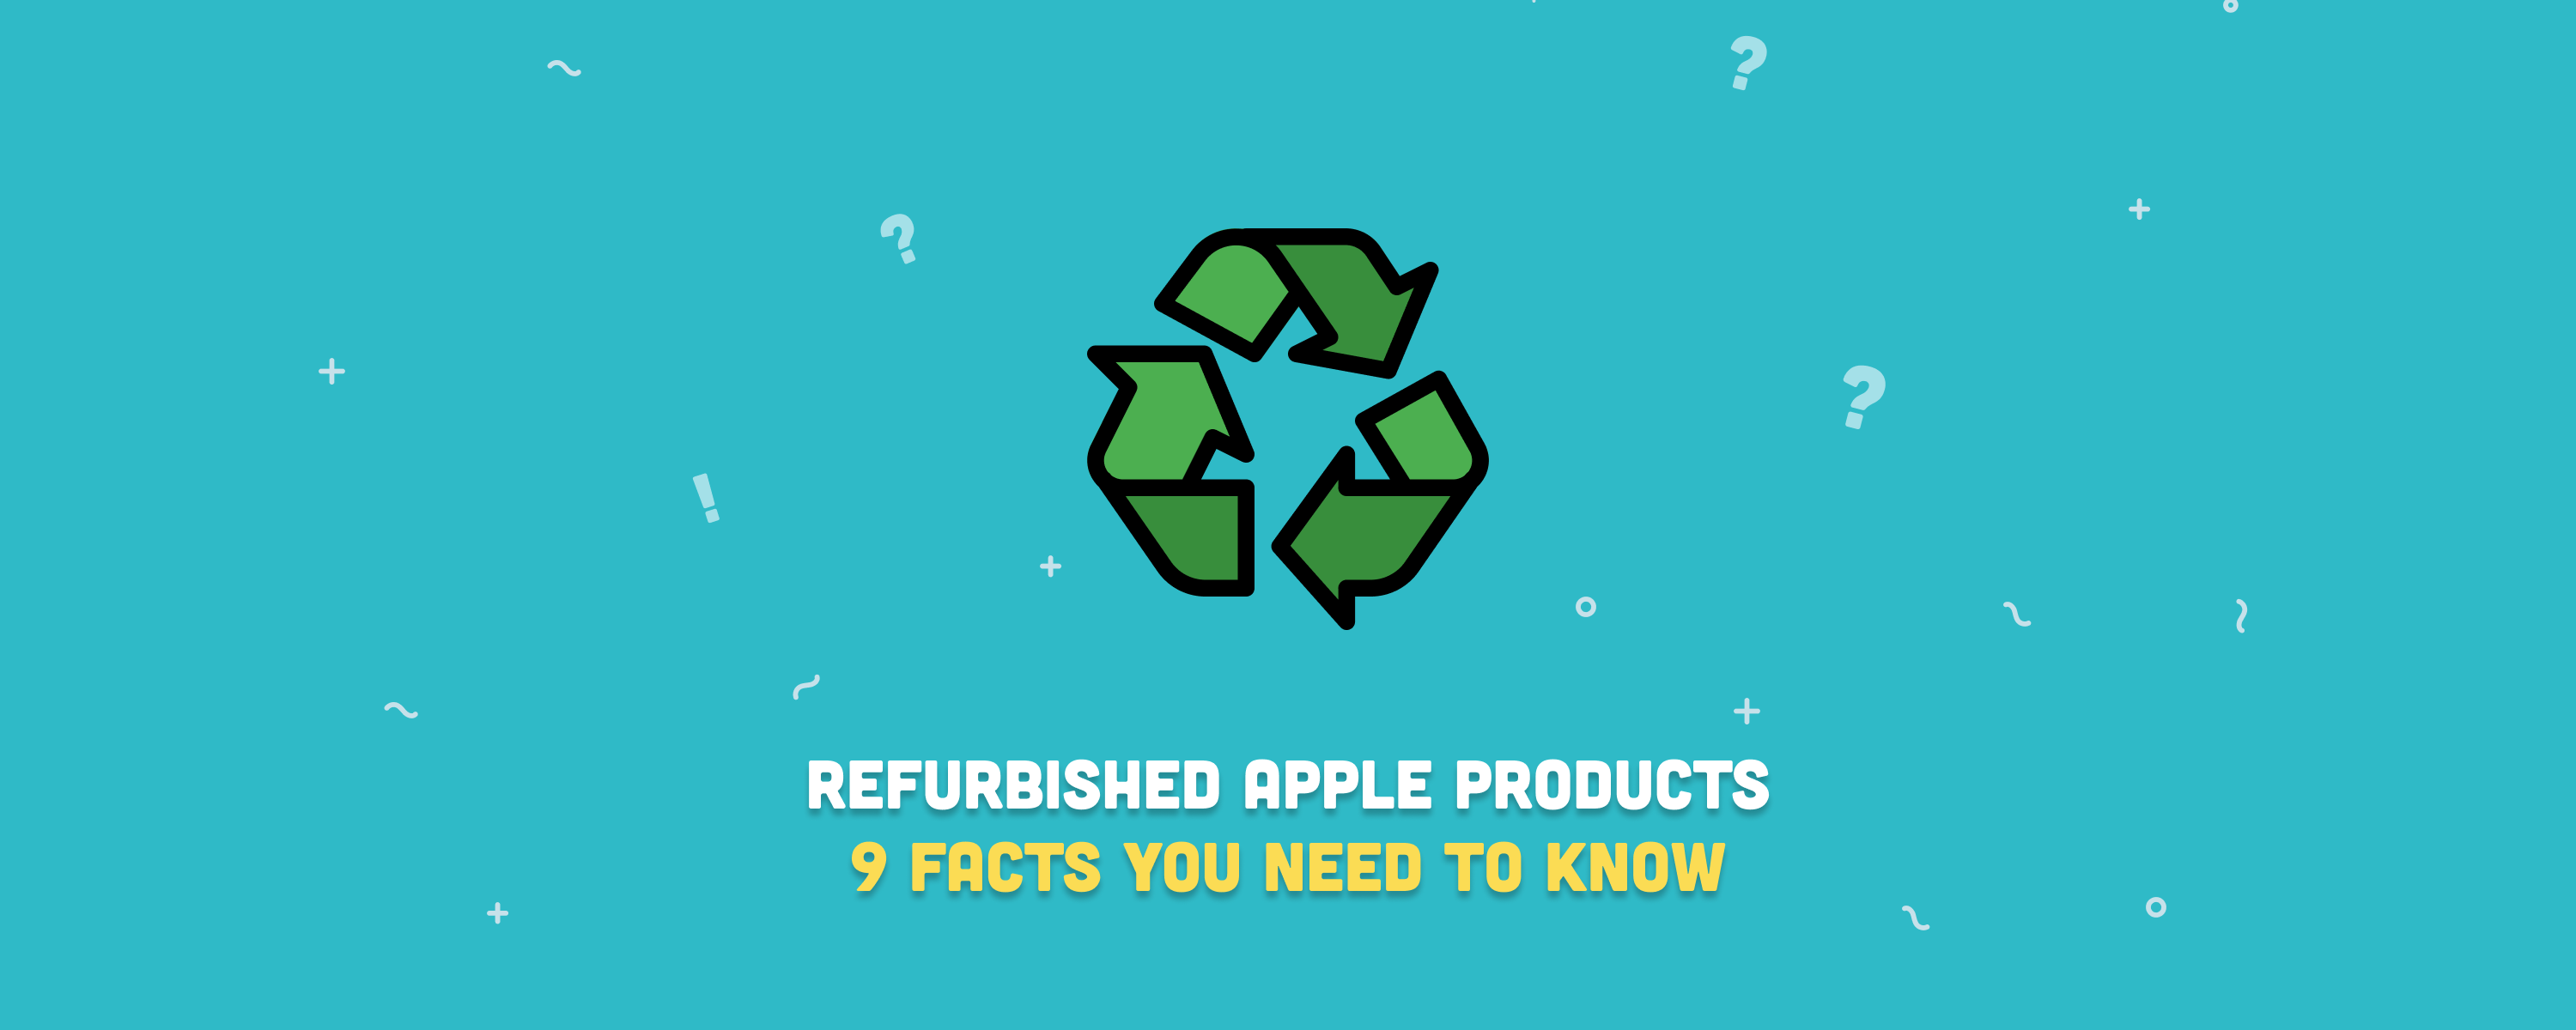 9 Facts You Need To Know Before Buying a Refurbished Apple Product